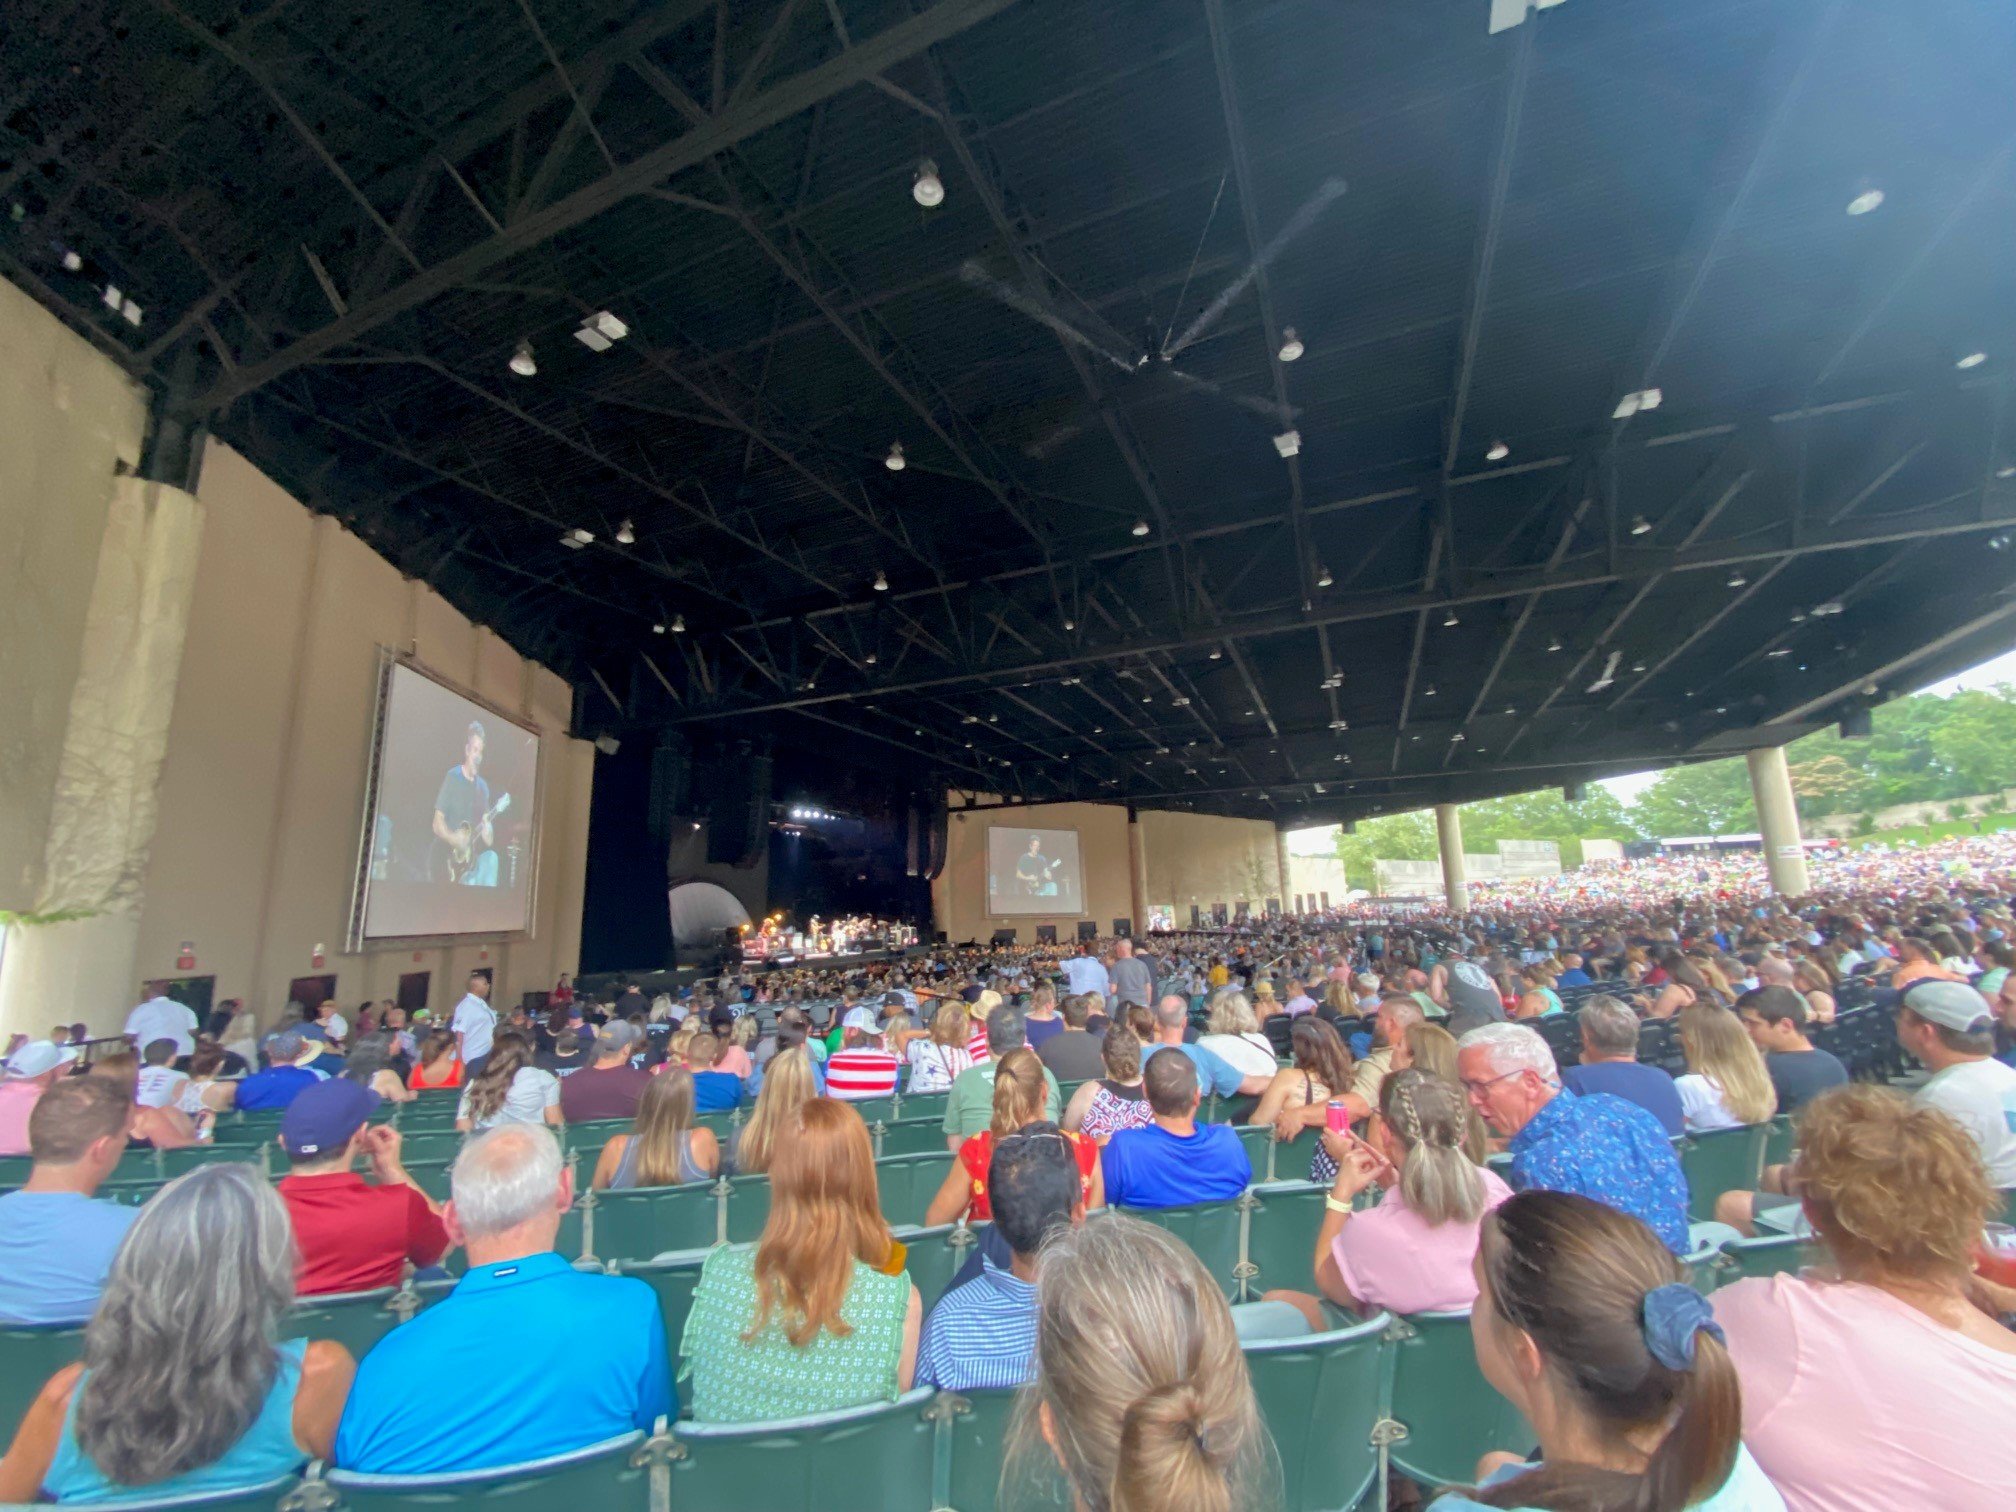 Section 207 At Lakewood Amphitheatre